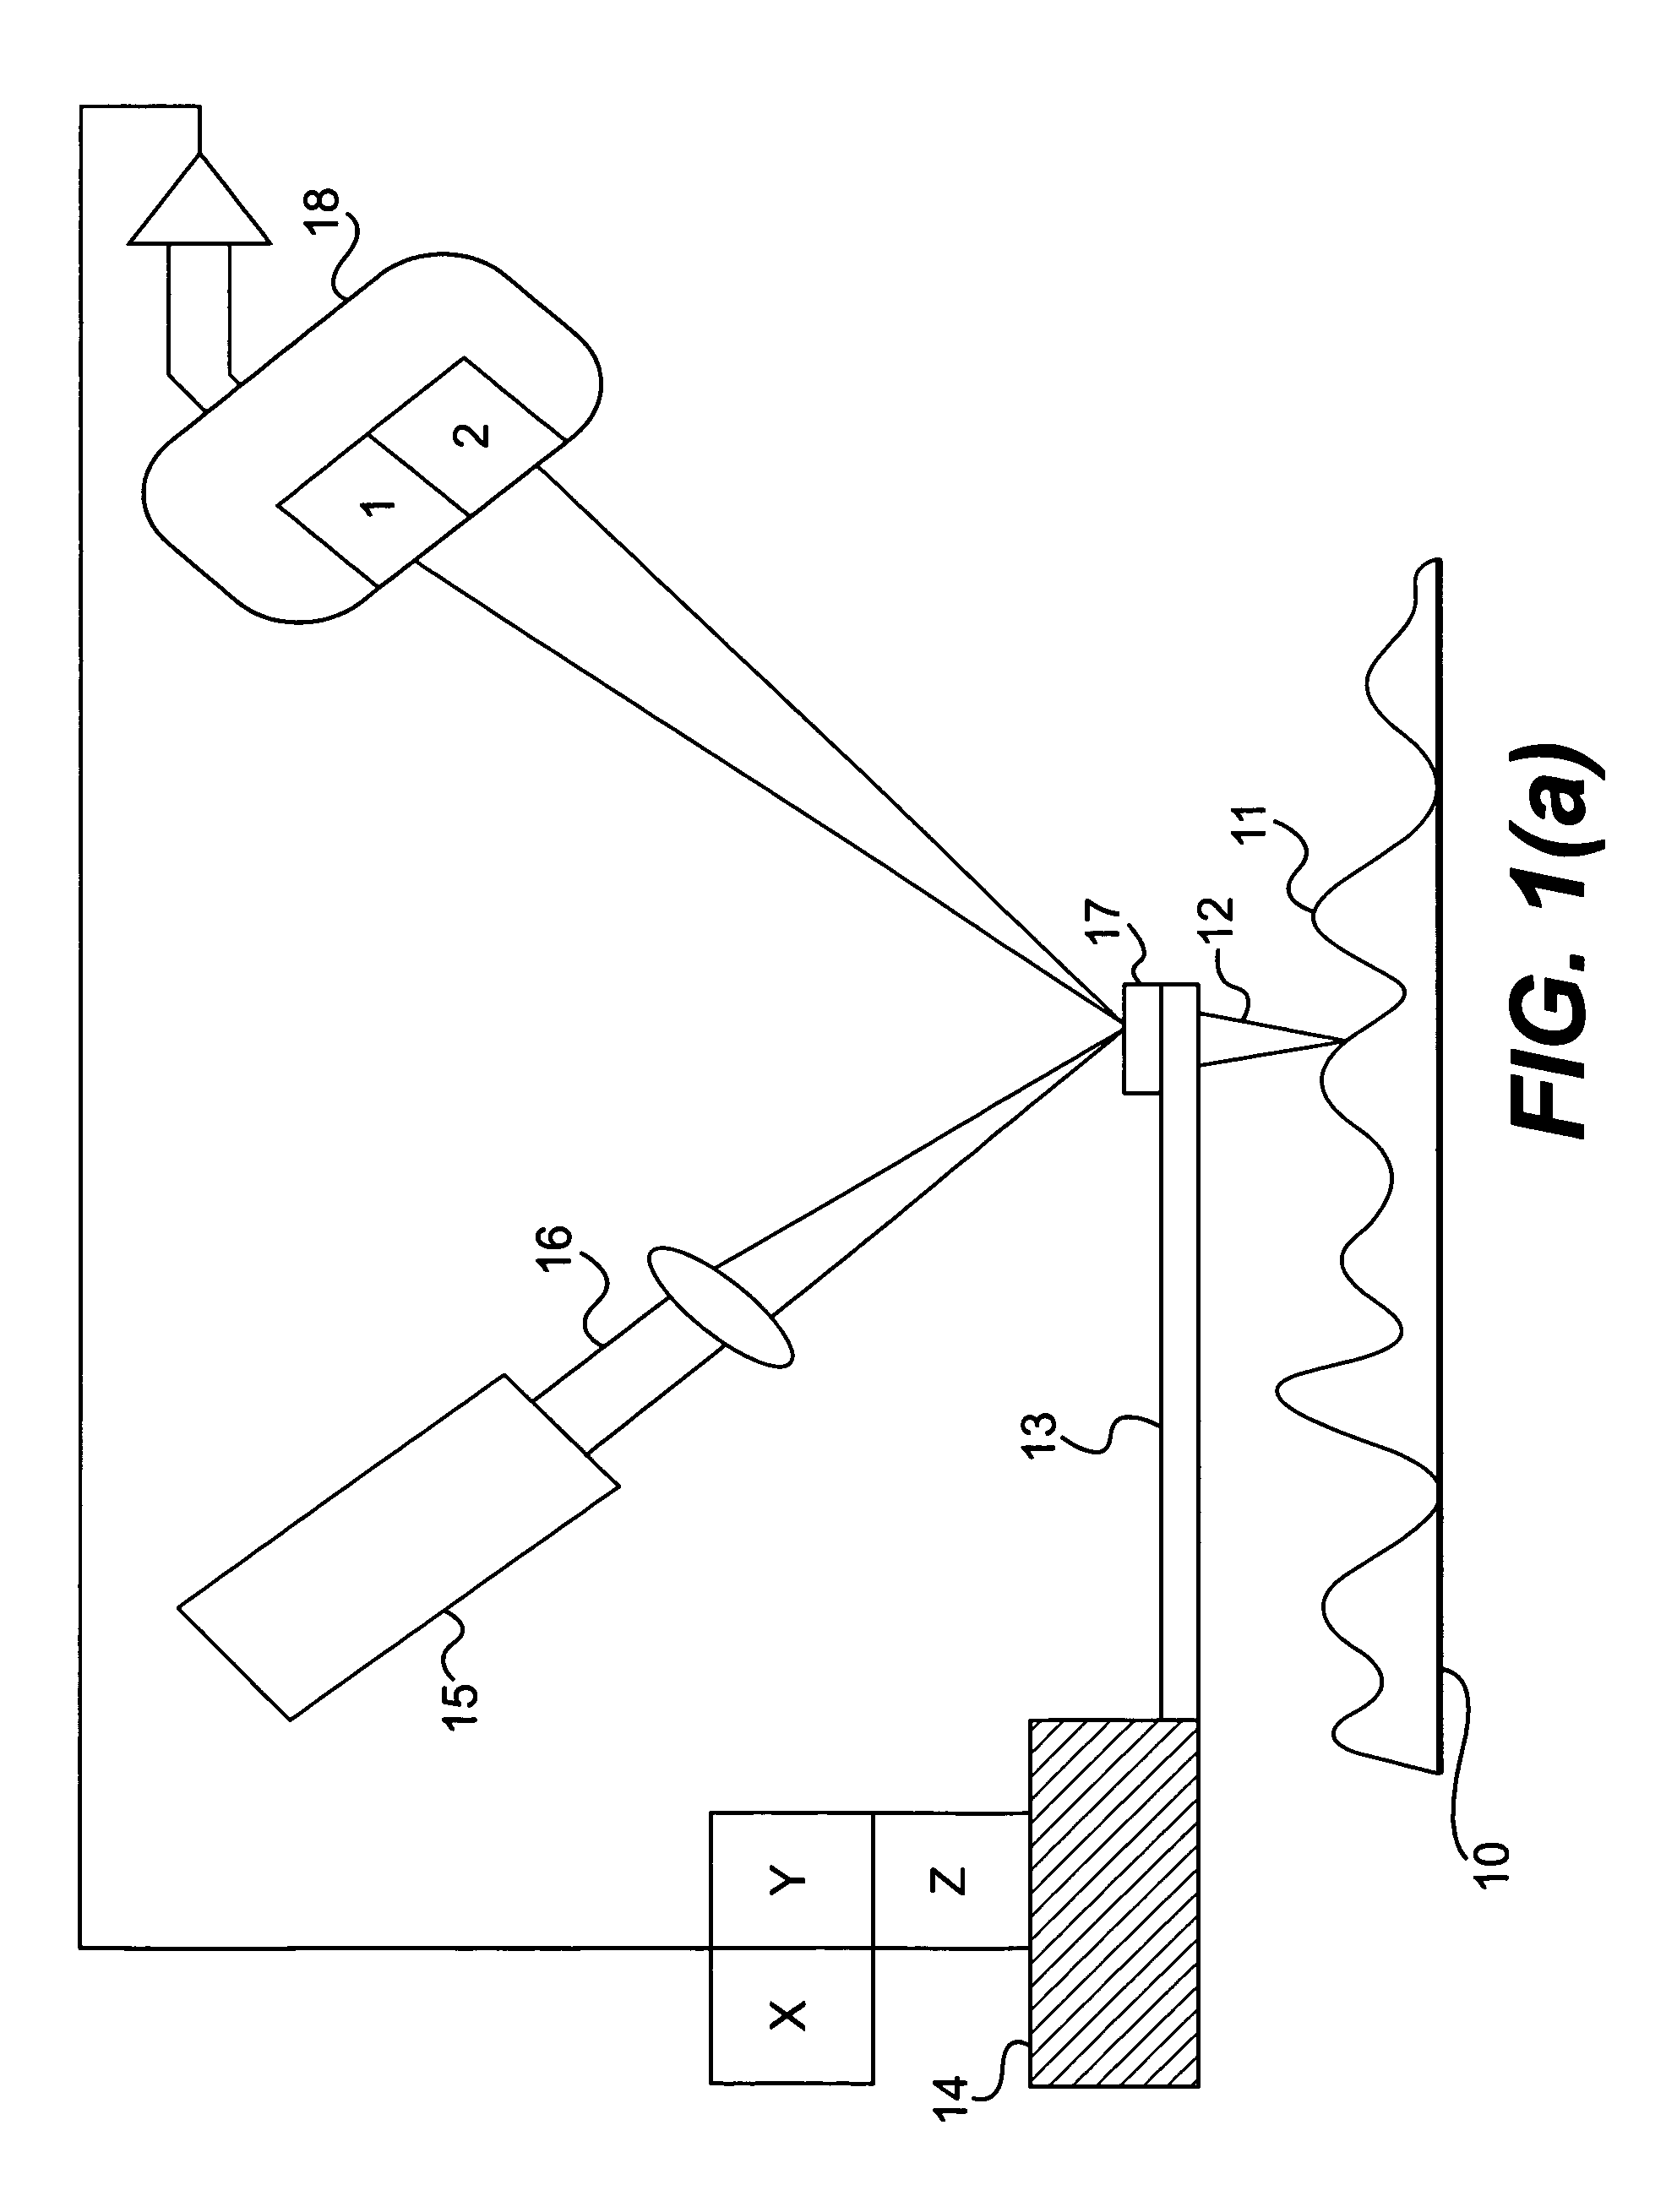 System and method for deconvoluting the effect of topography on scanning probe microscopy measurements